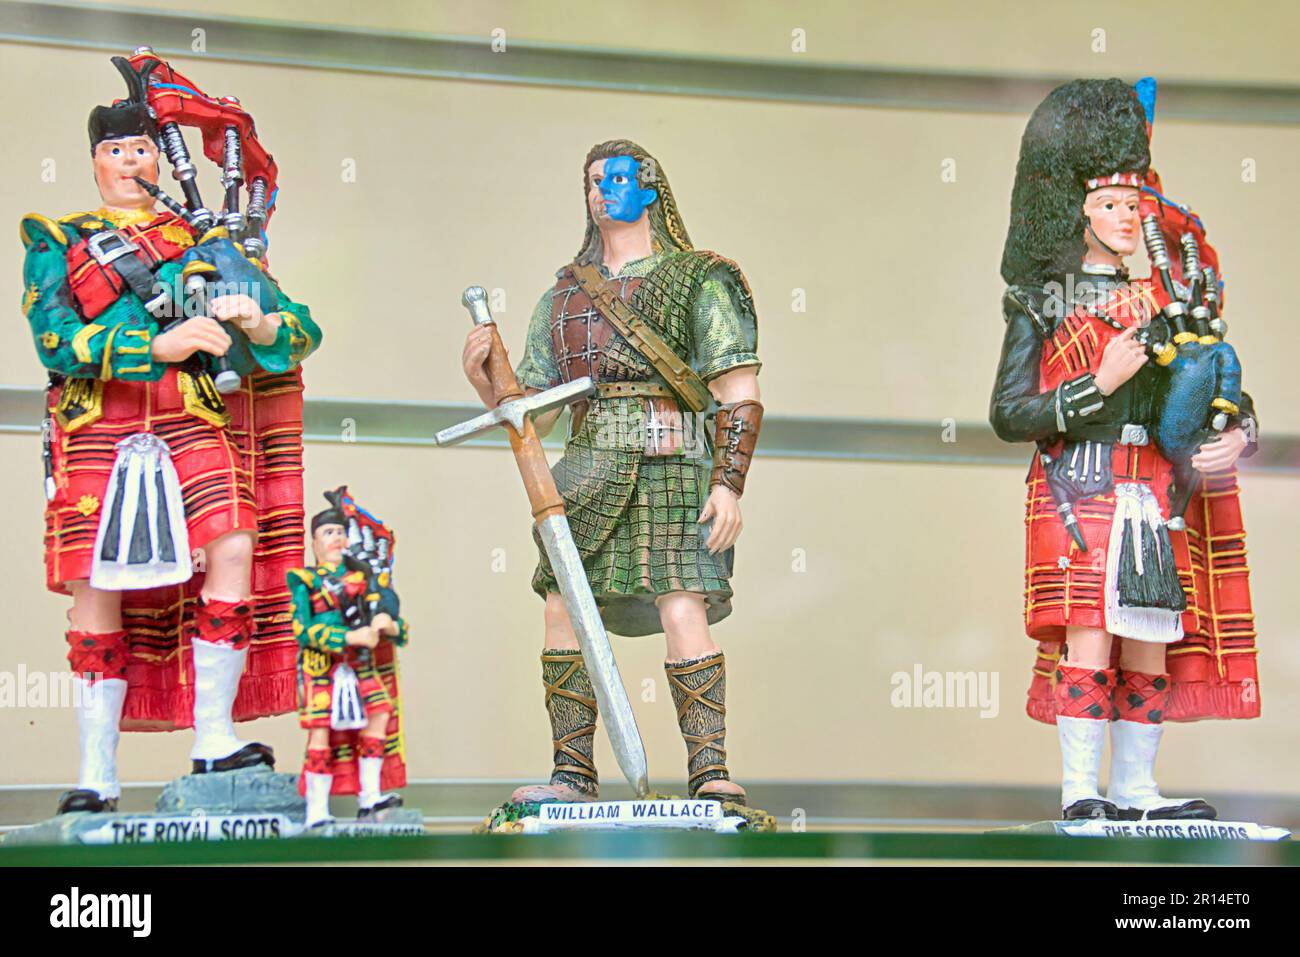 mel gibson william wallace et piper s figurines Banque D'Images